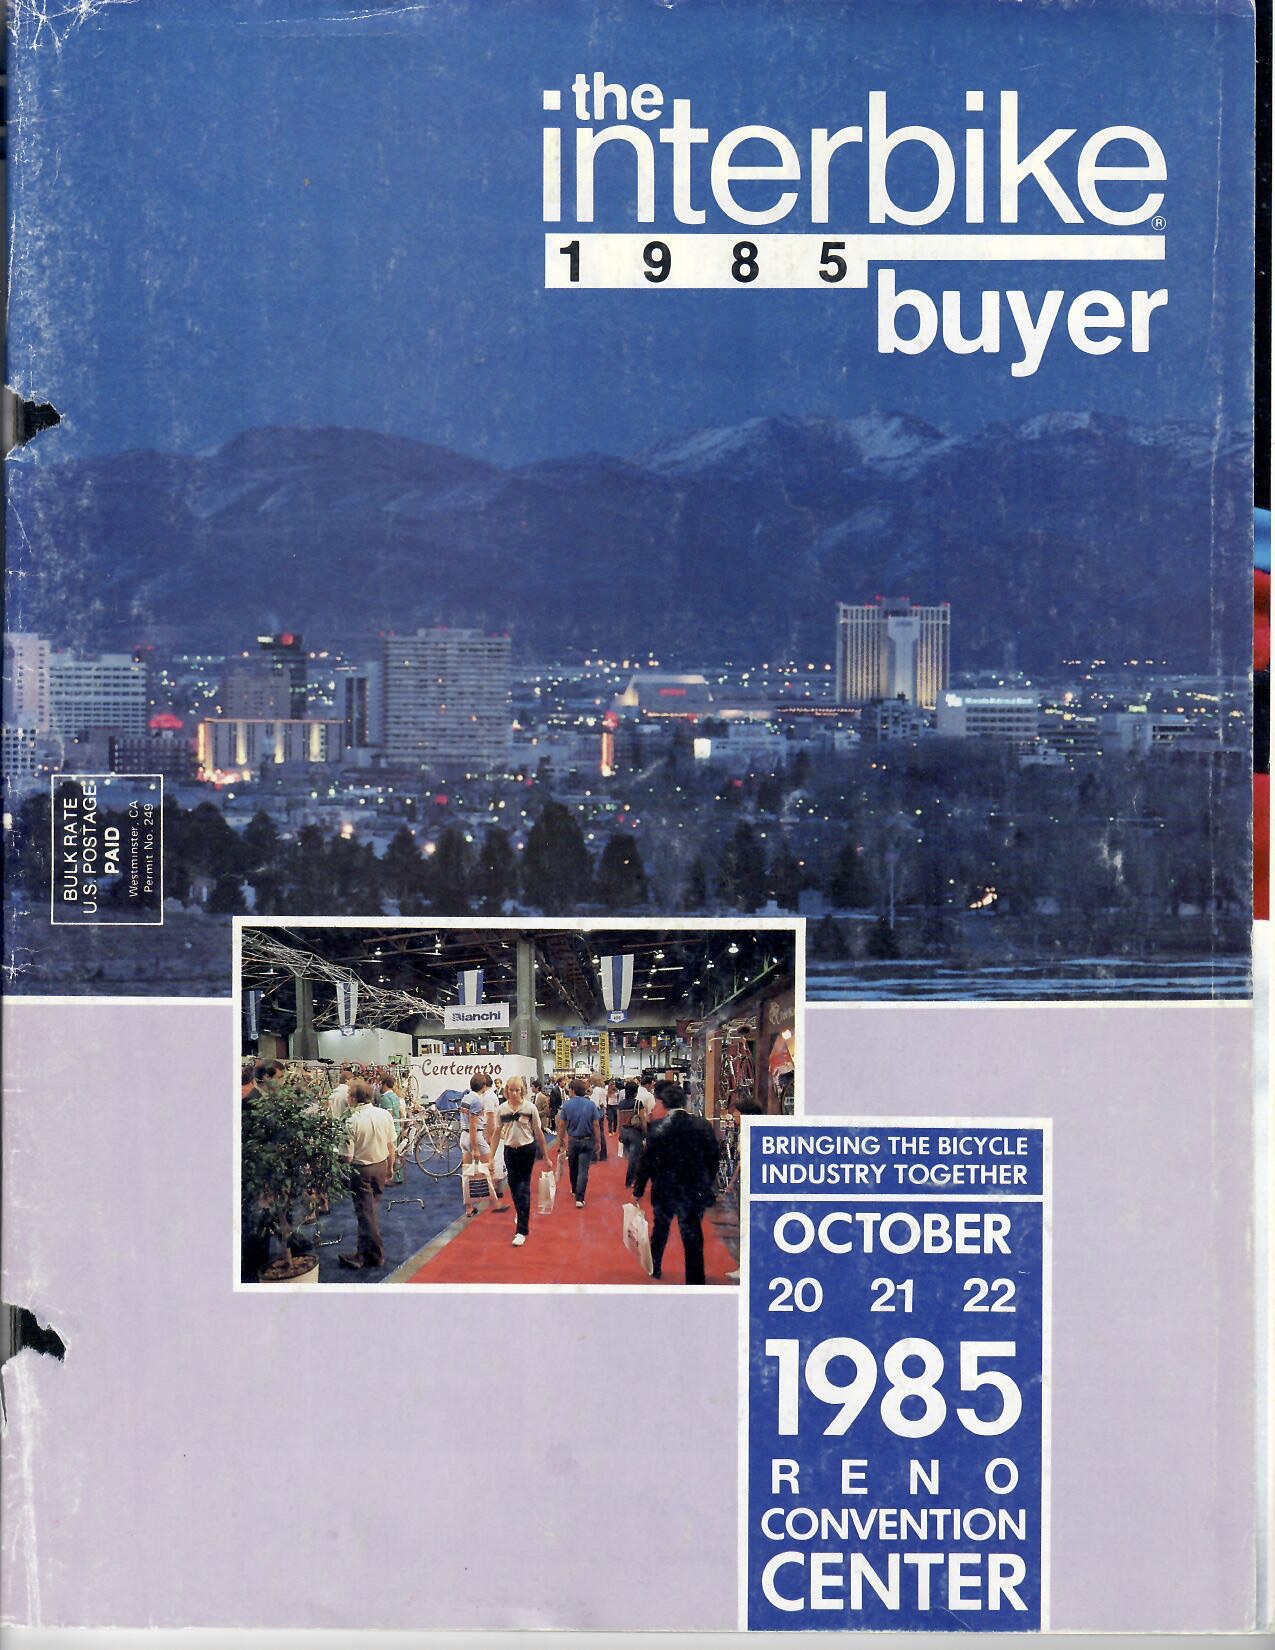 Interbike was held in Reno in the mid-1980s.